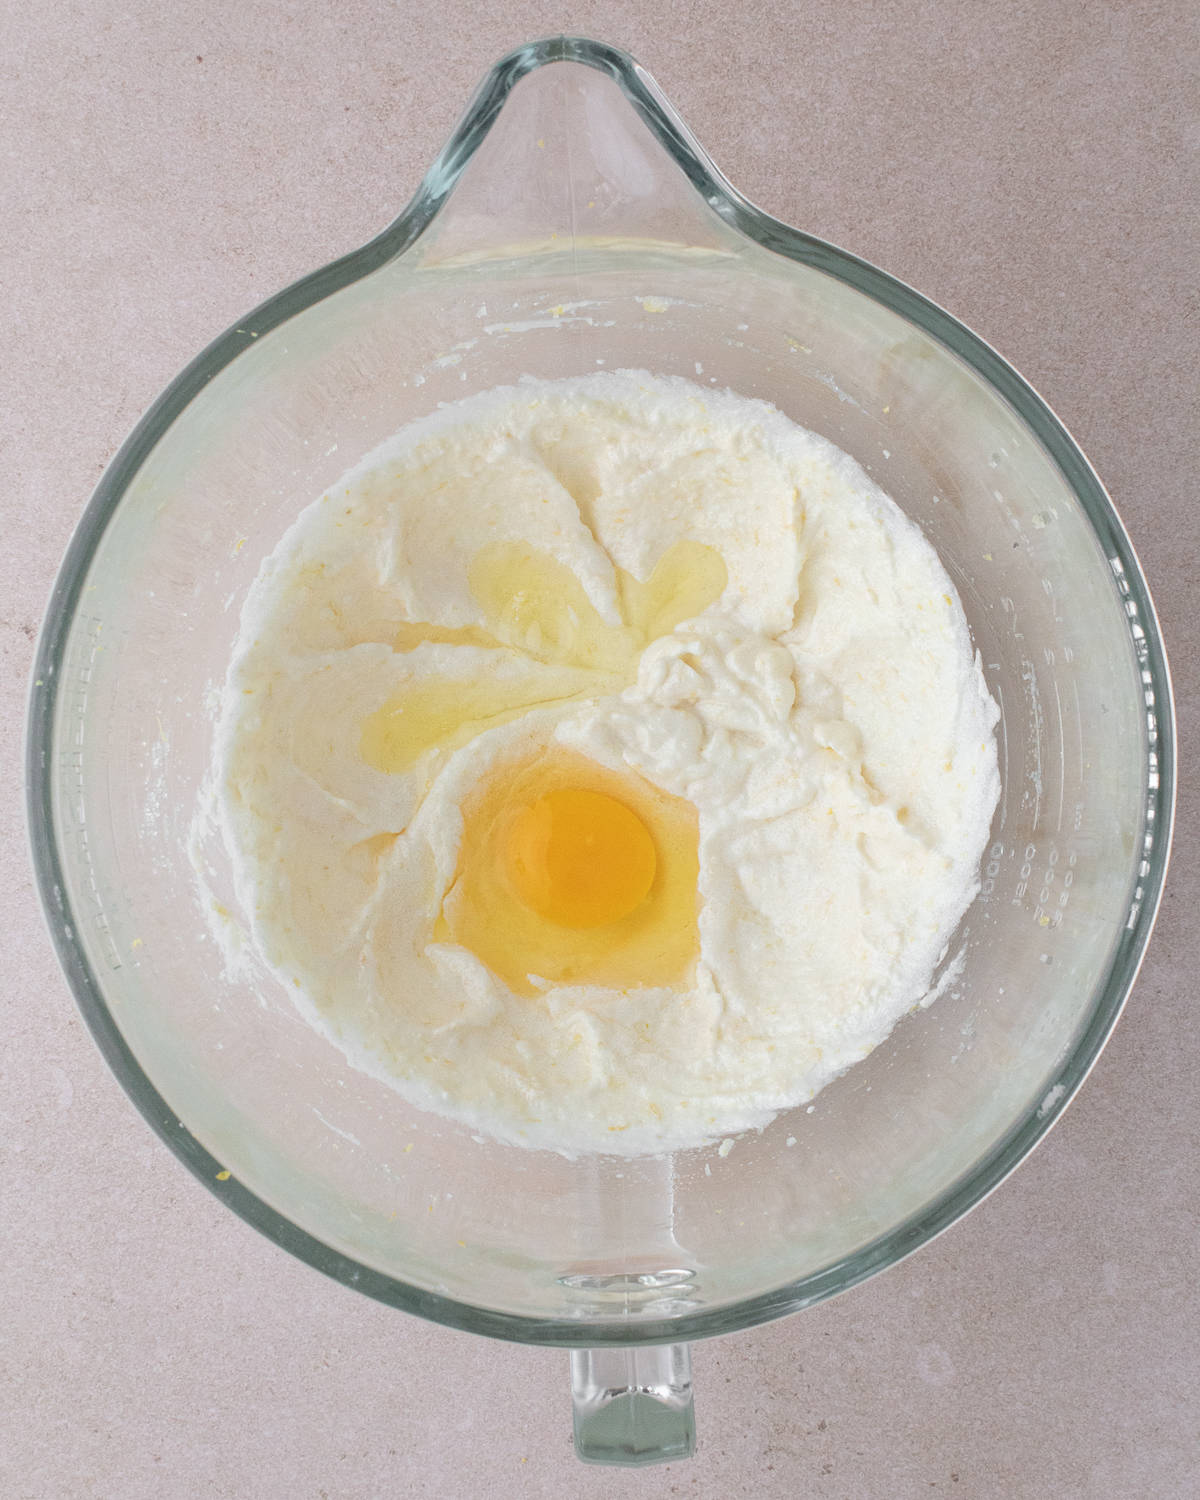 Egg is added to sugar, butter, oil mixture